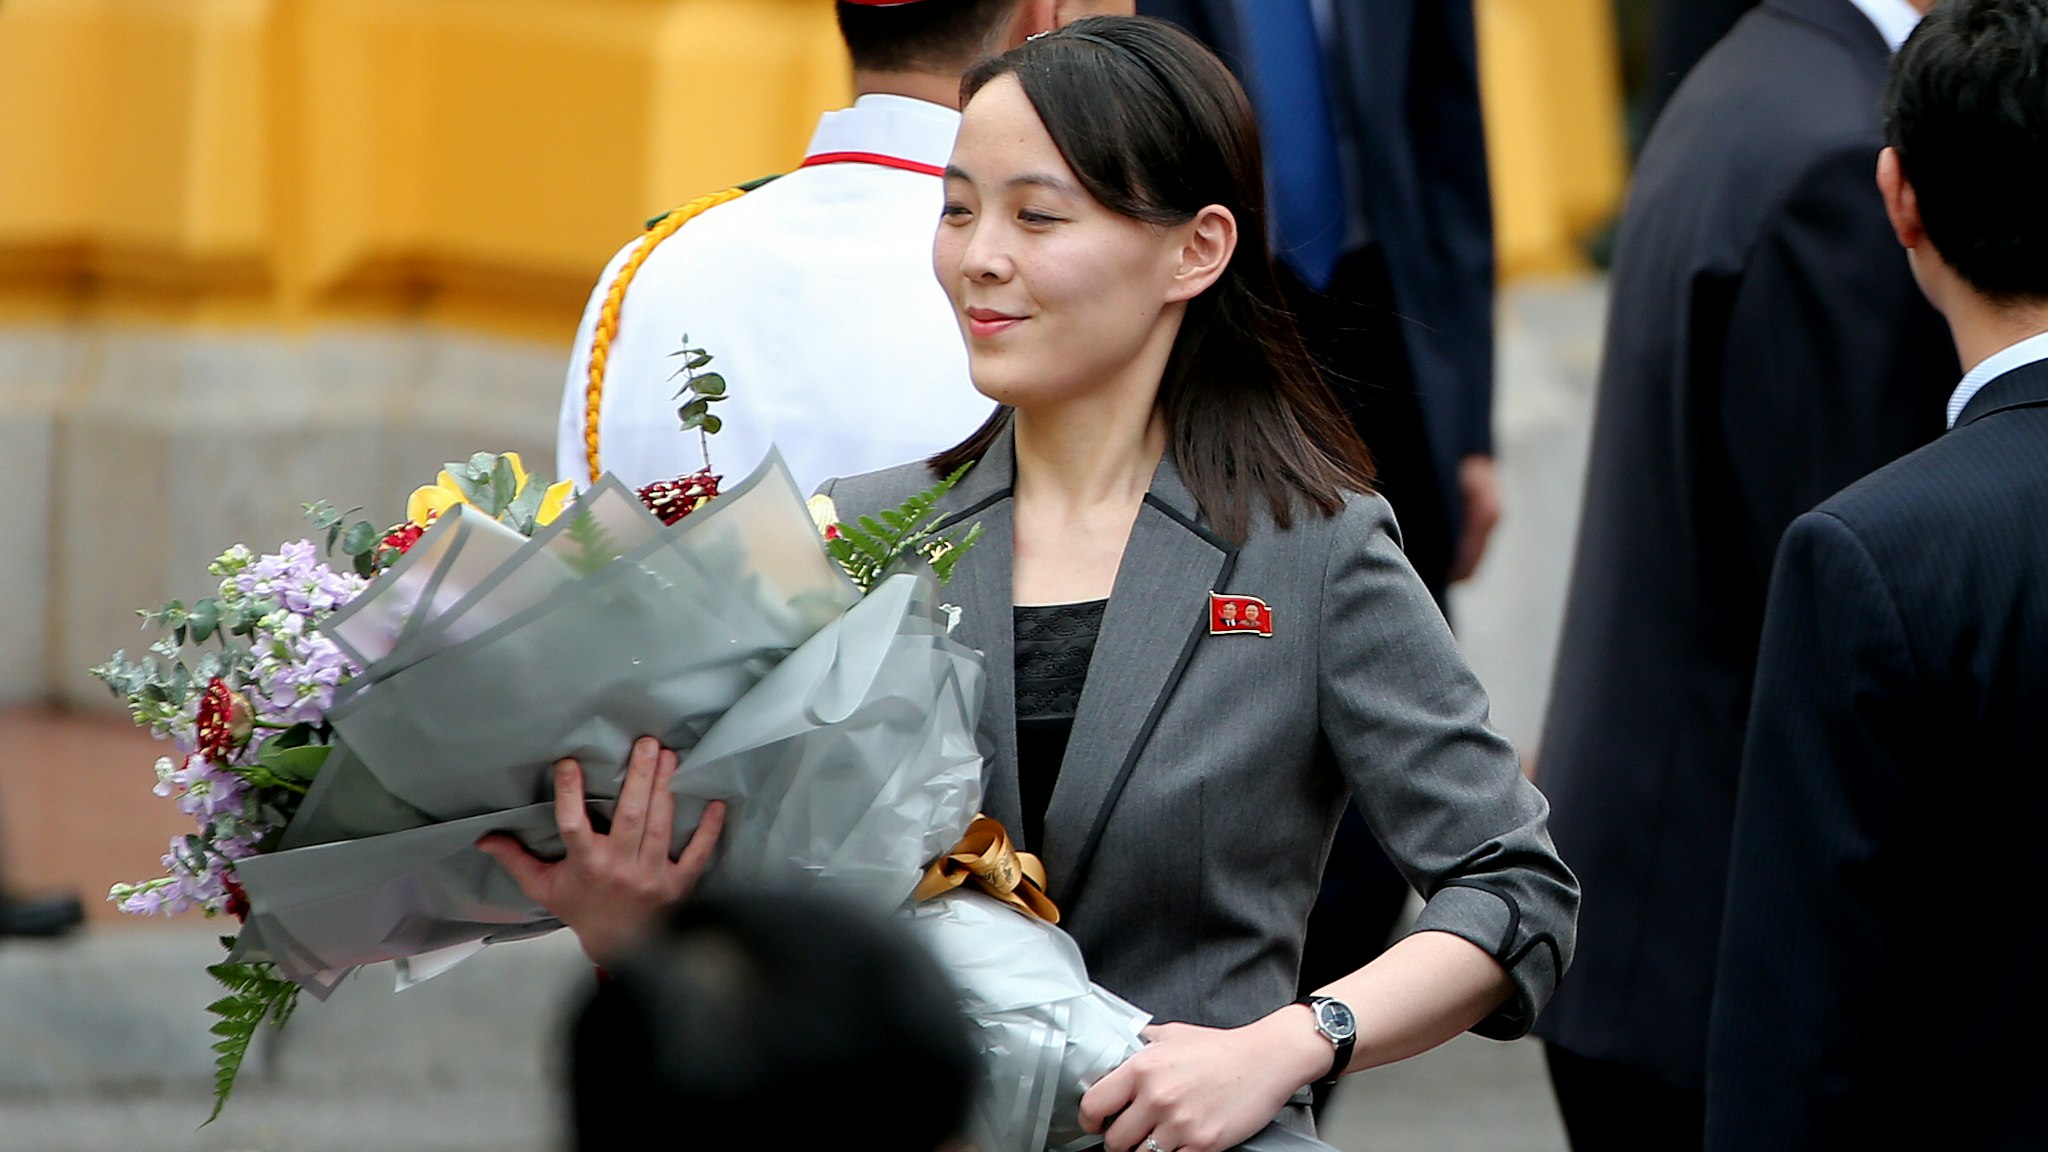 Kim Yo Jong, sister of North Korean leader Kim Jong Un, holds a flower bouquet during a welcoming ceremony at the Presidential Palace in Hanoi, Vietnam, on Friday, March 1, 2019. Kim will have a long train ride home through China to think about what went wrong in his second summit with Donald Trump and how to keep it from reversing his gains of the past year. Photographer: Luong Thai Linh/Pool via Bloomberg